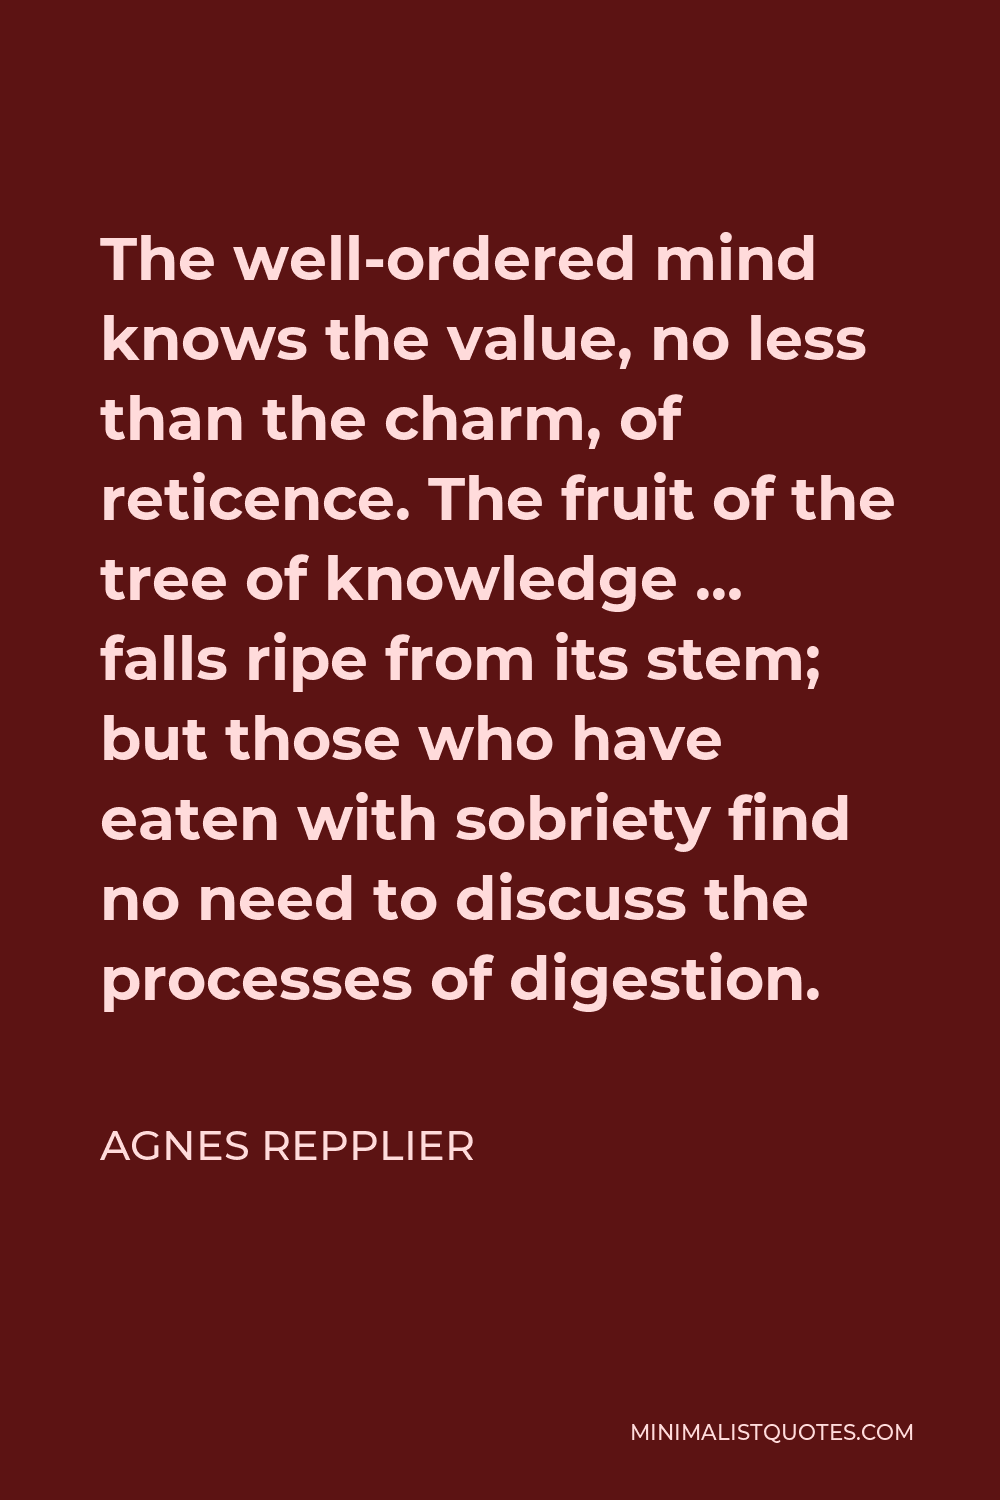 Agnes Repplier Quote - The well-ordered mind knows the value, no less than the charm, of reticence. The fruit of the tree of knowledge … falls ripe from its stem; but those who have eaten with sobriety find no need to discuss the processes of digestion.